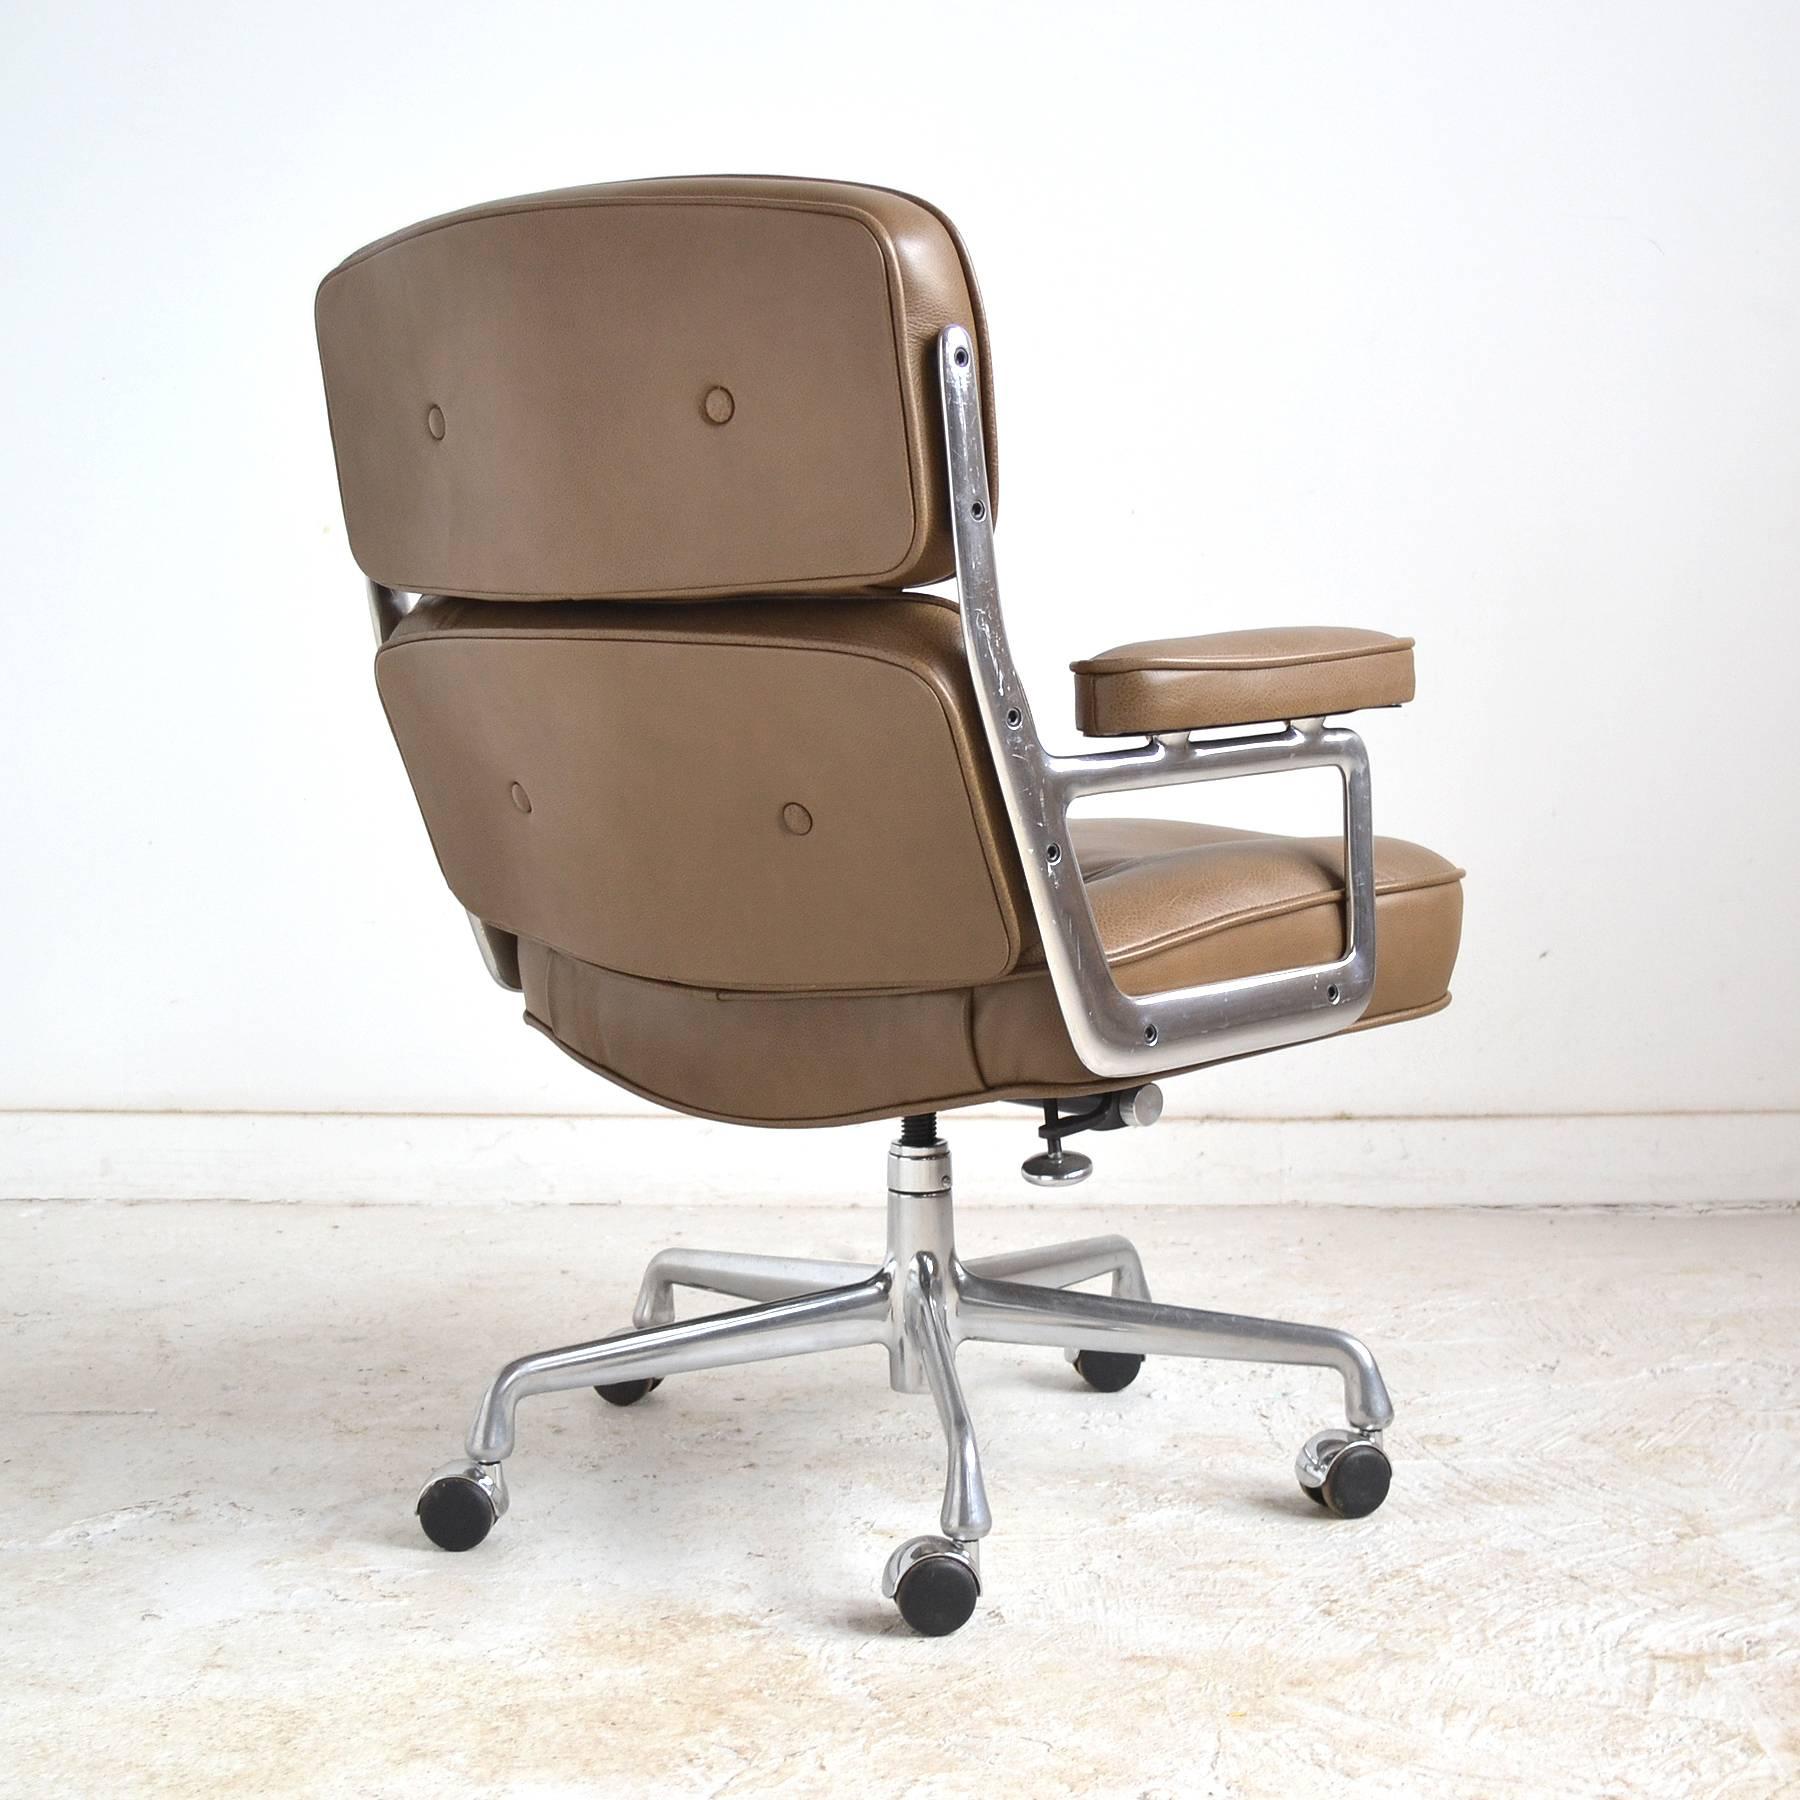 Leather Charles and Ray Eames Time-Life Chair by Herman Miller